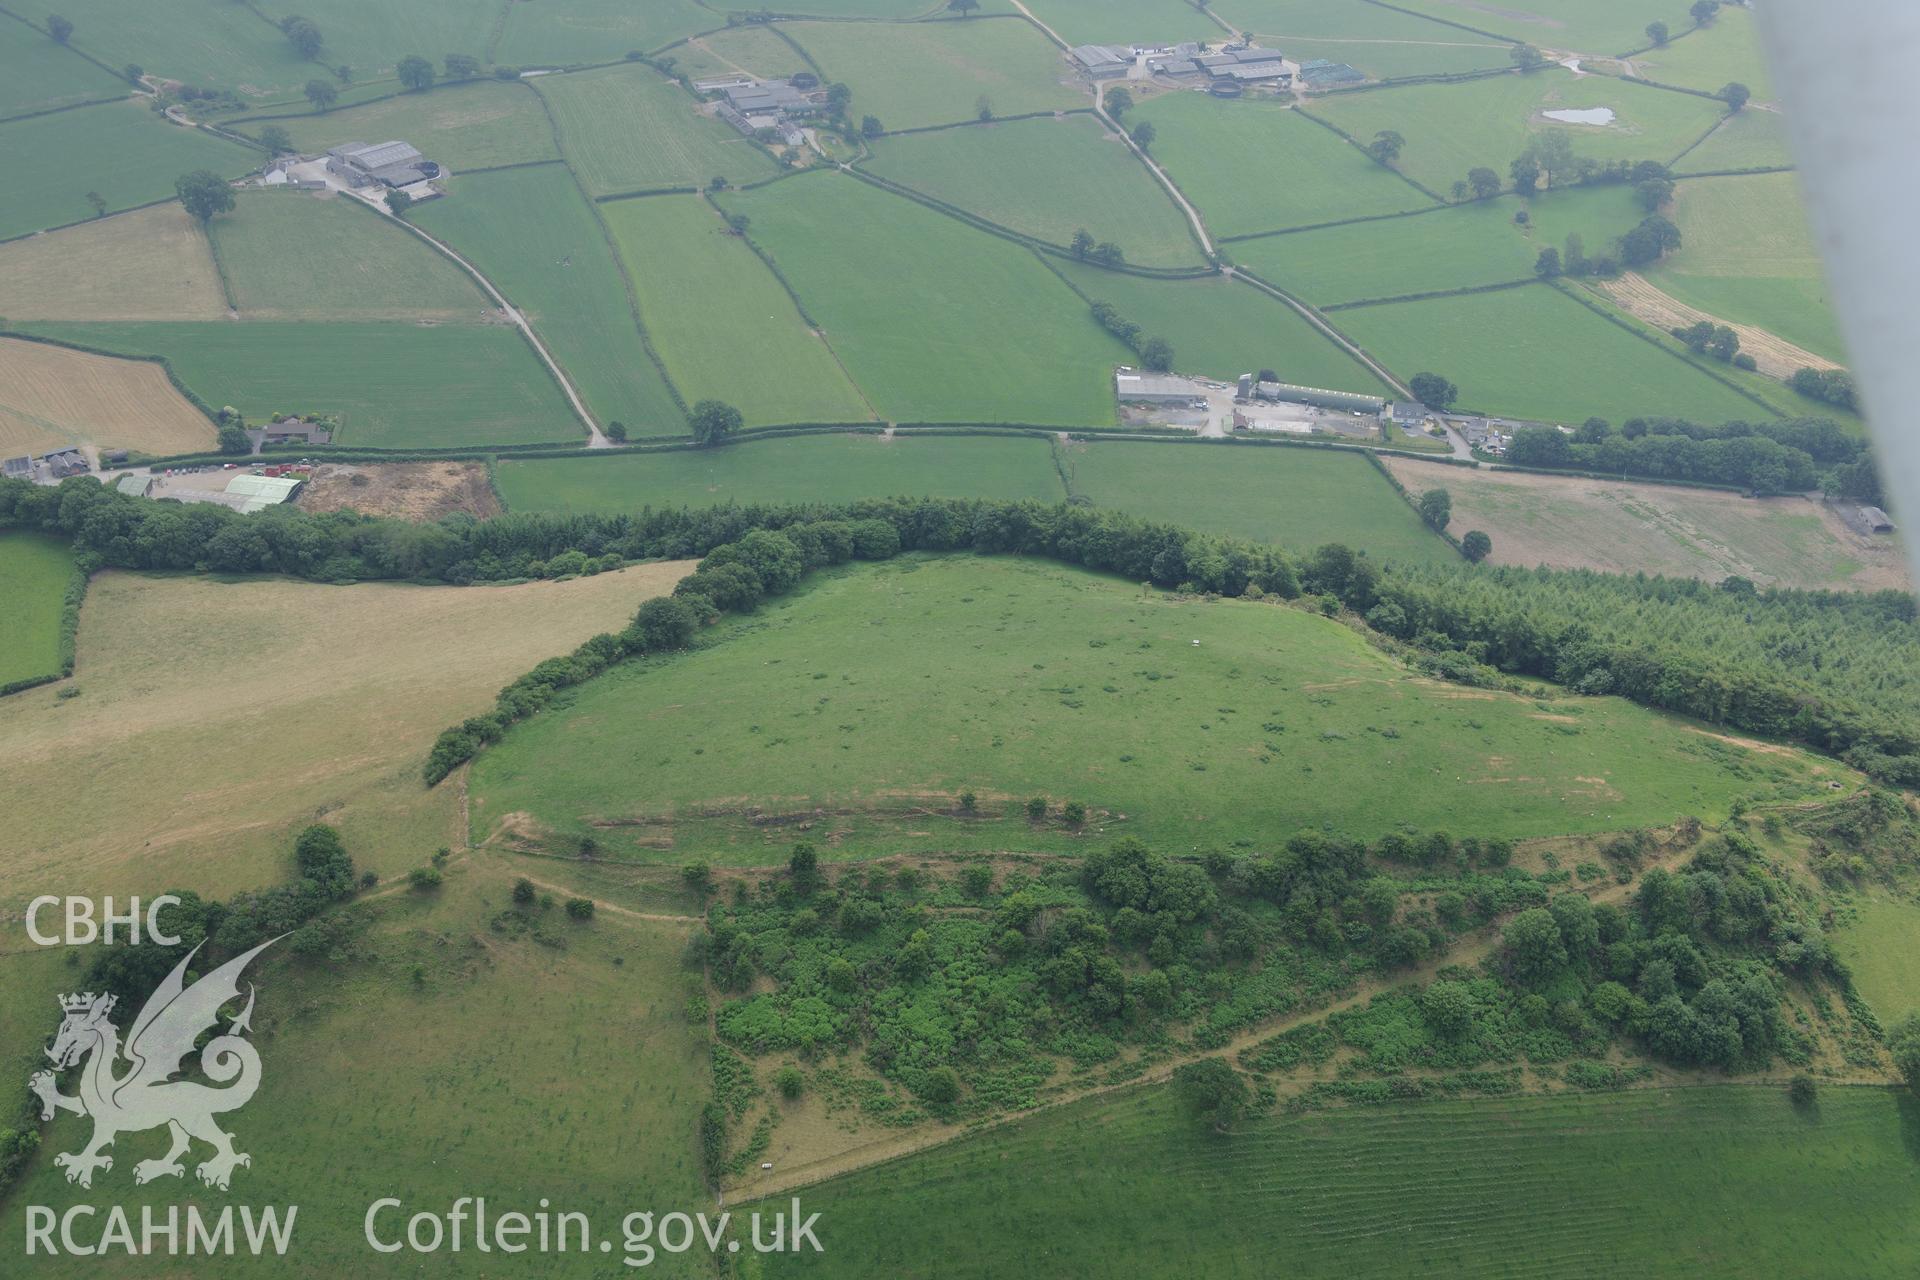 Royal Commission aerial photography of Merlin's Hill Fort taken during drought conditions on 22nd July 2013.